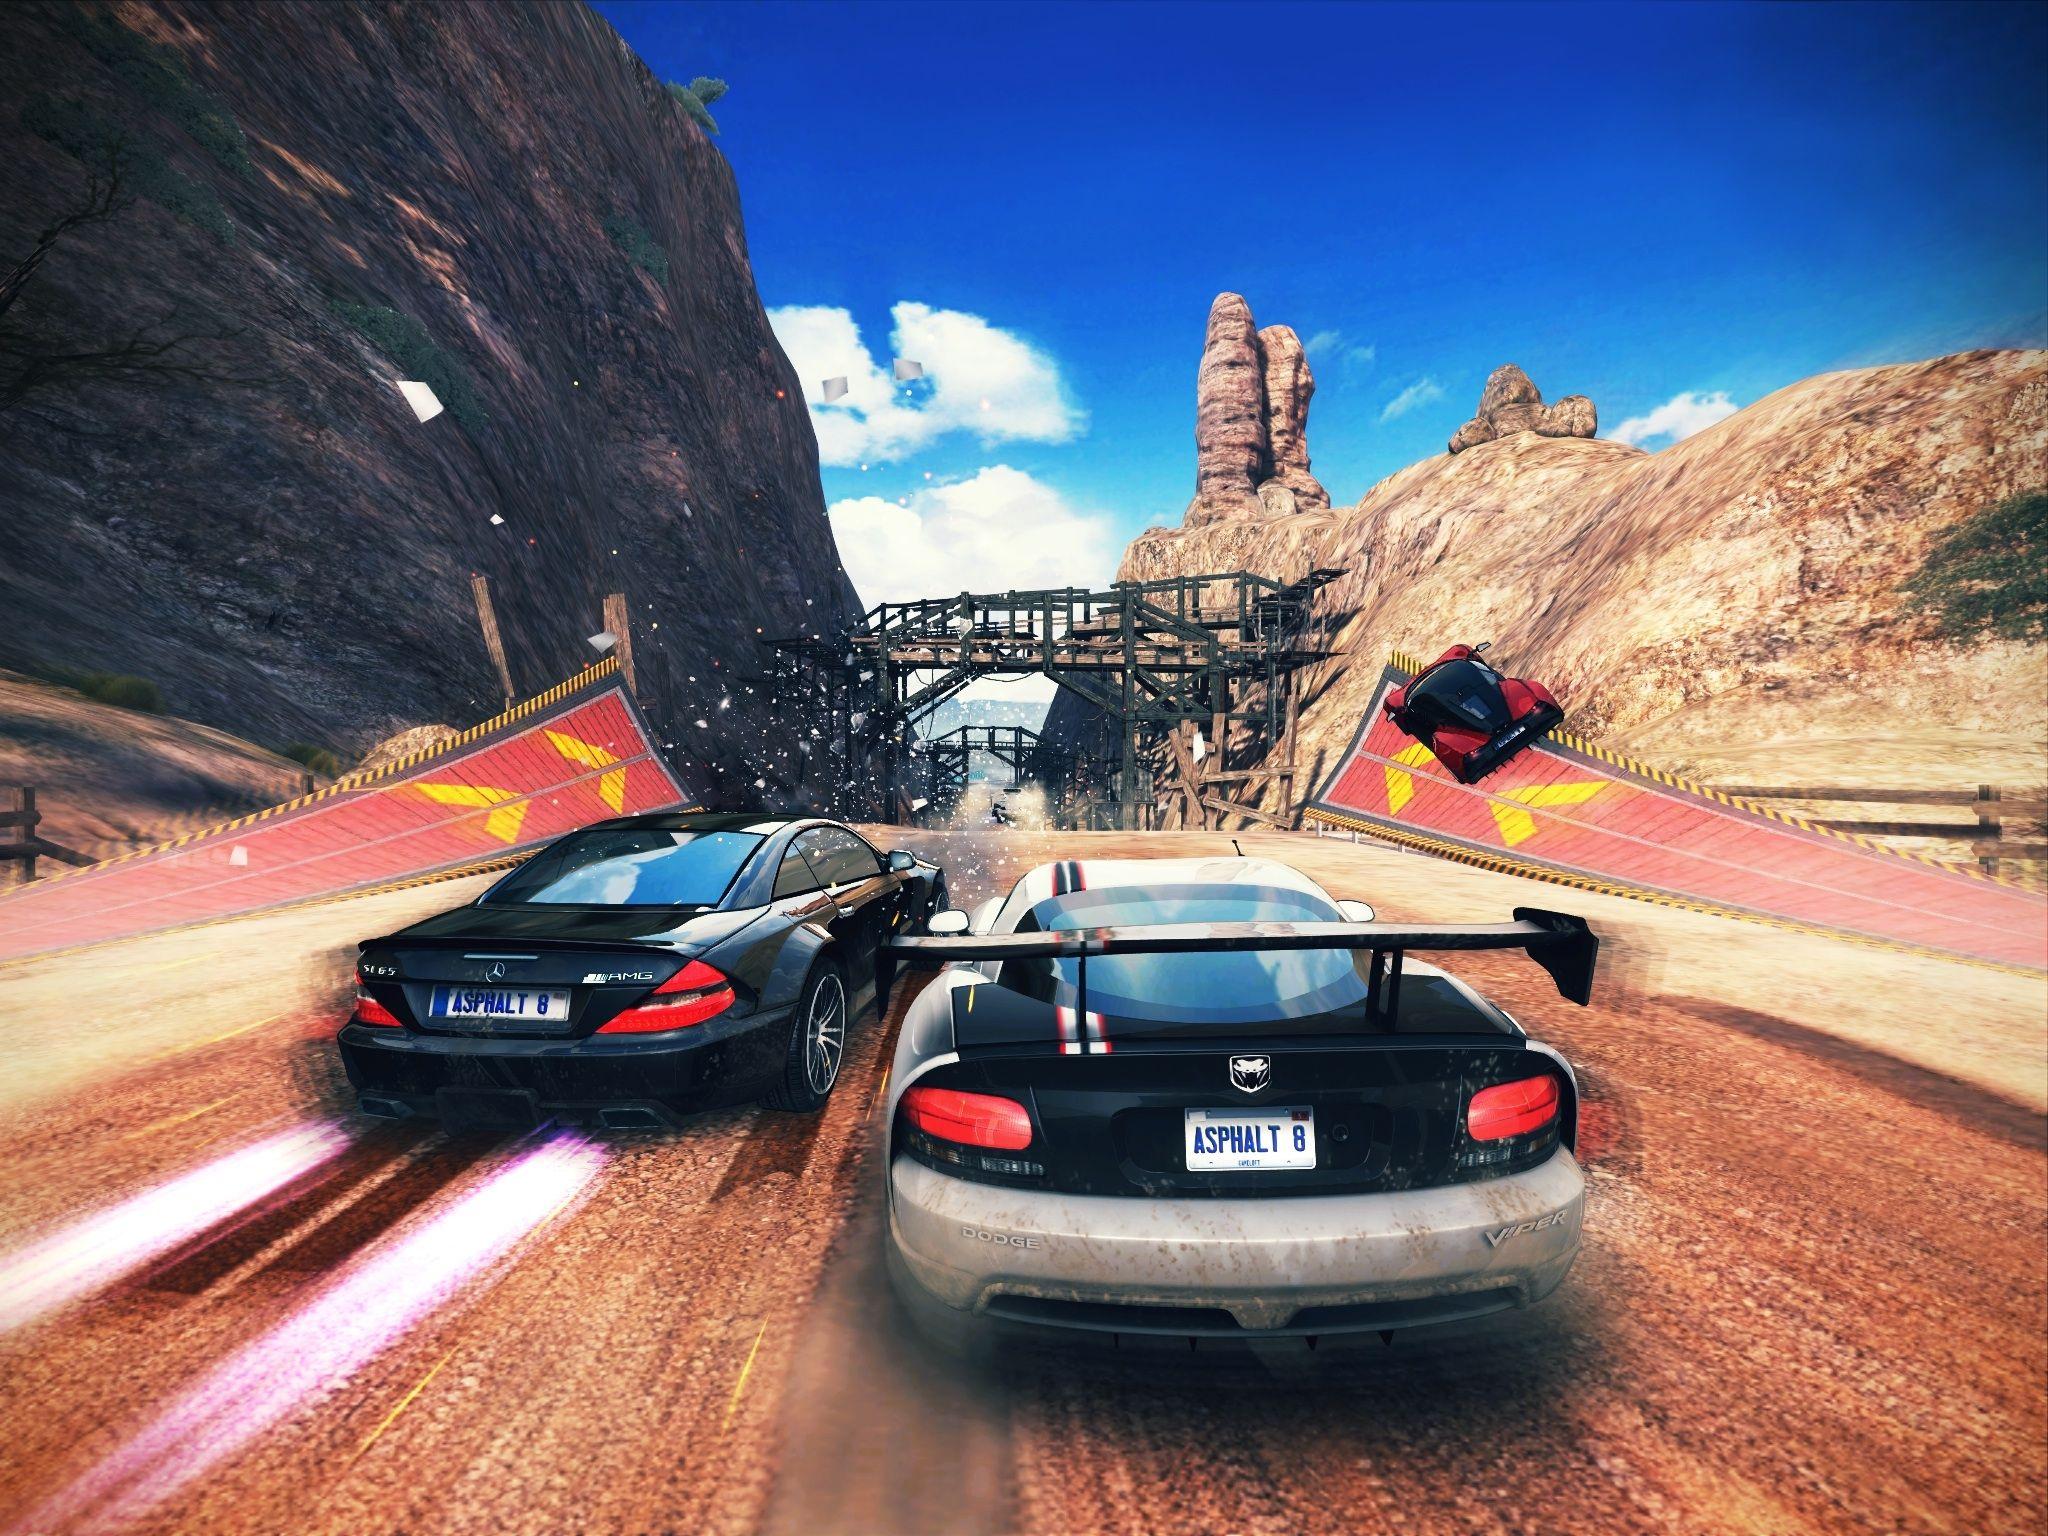 Asphalt 8: Airborne Is Now Available For Free On The App Store